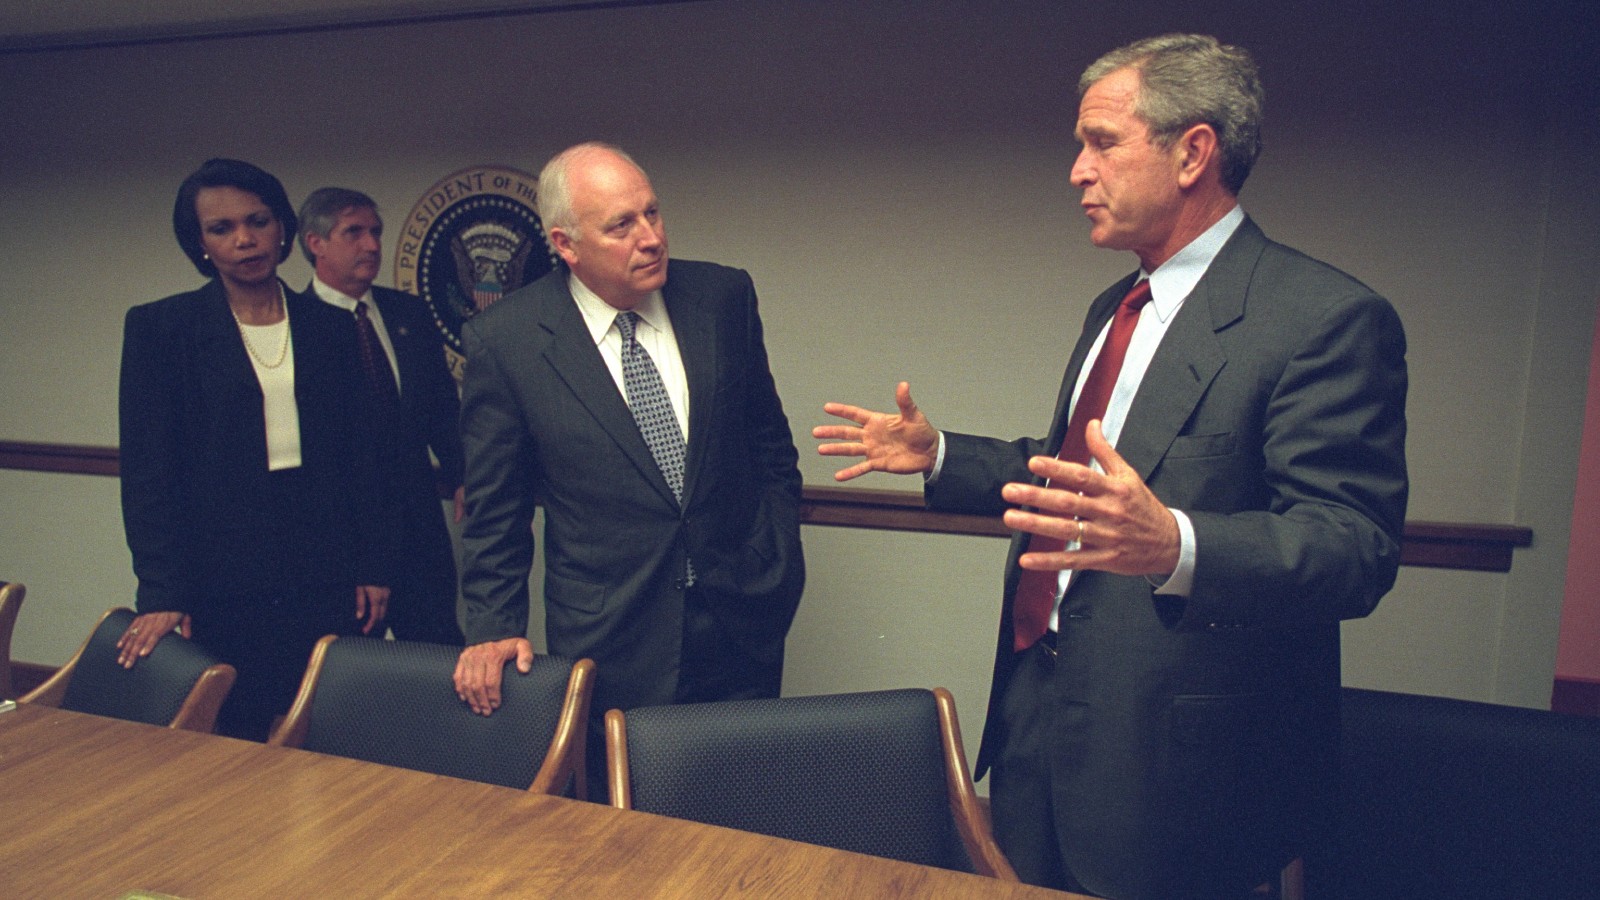 Photos Of Cheney Bush From 9 11 Released For First Time